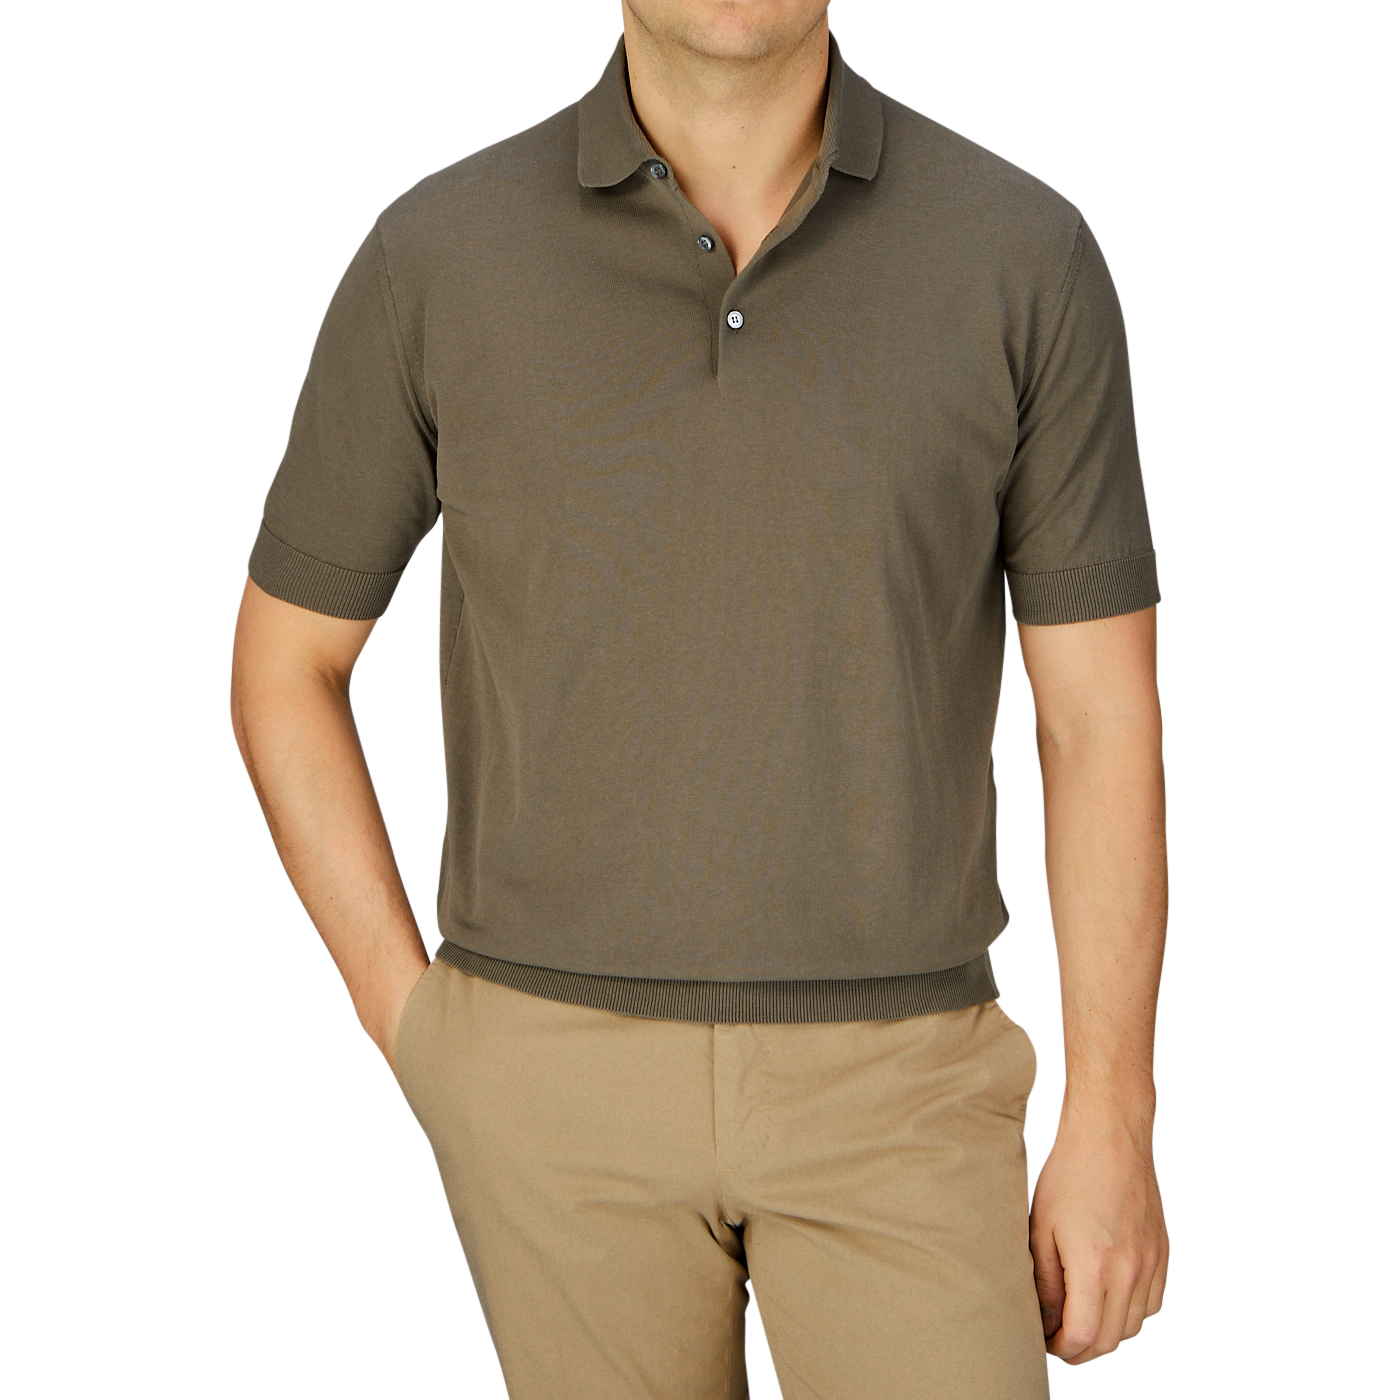 Man wearing a Filippo de Laurentiis Olive Green Crepe Cotton Polo Shirt and beige pants against a gray background.